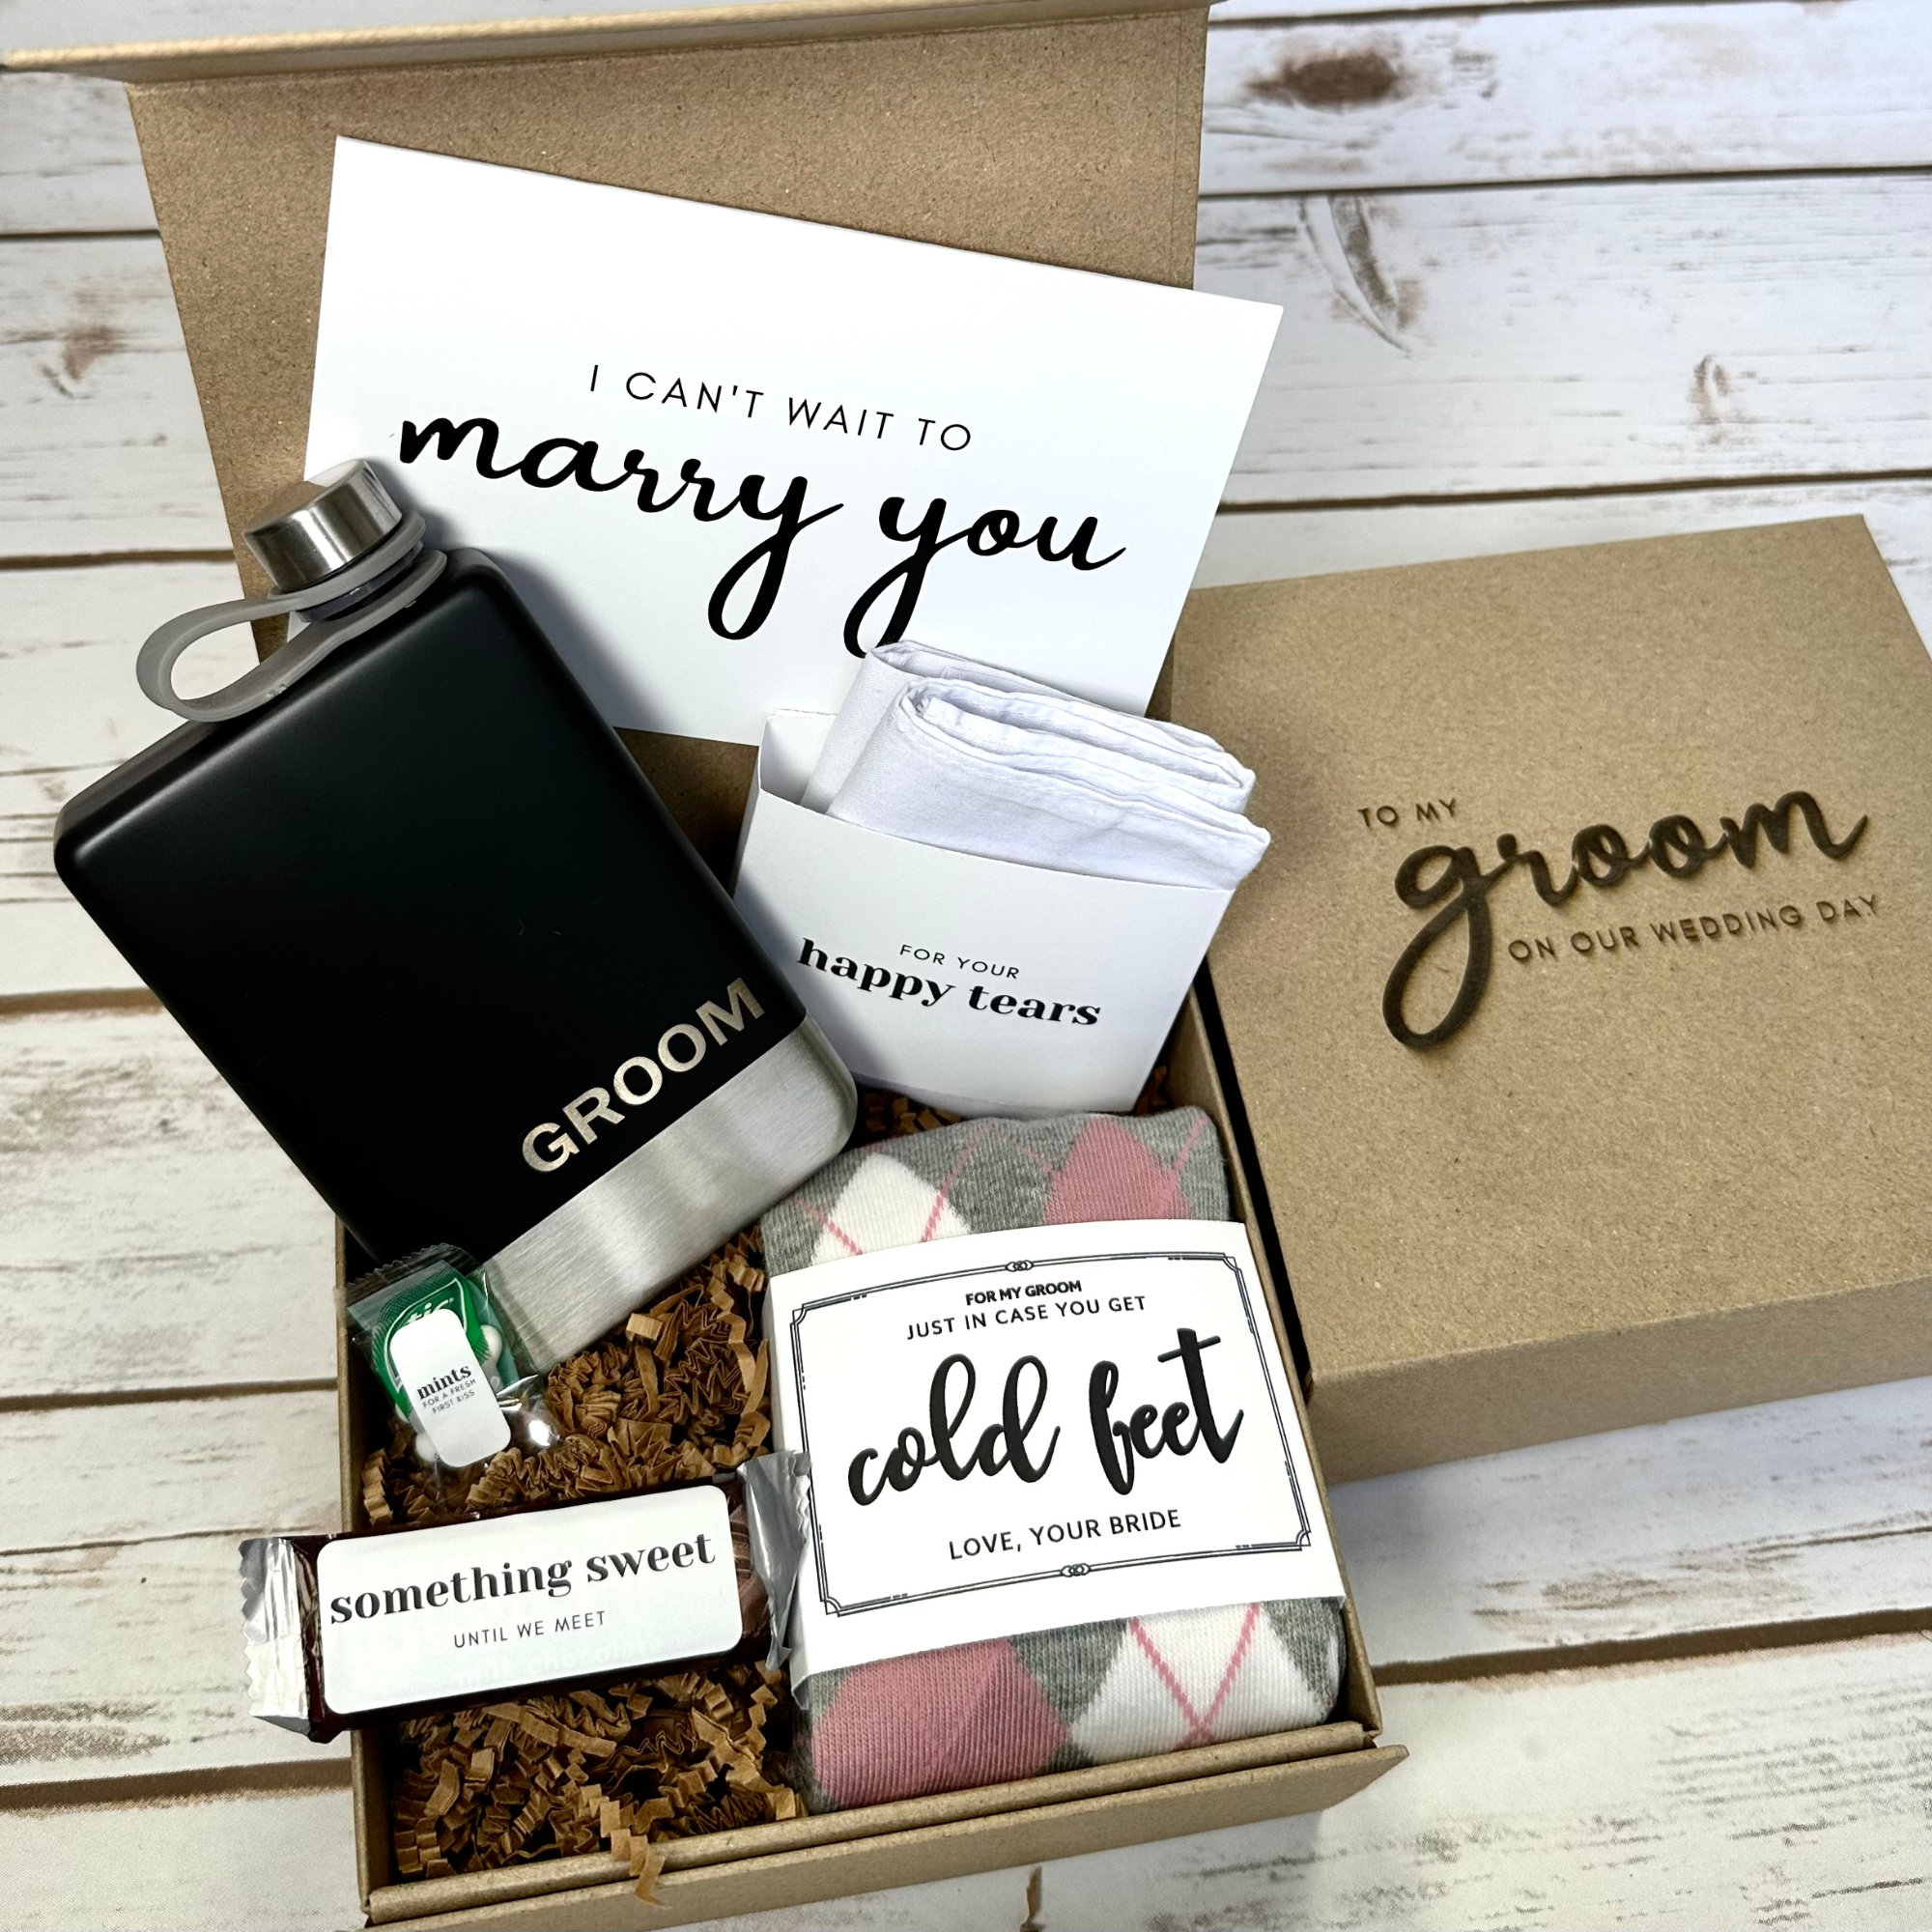 Groom Gifts from Bride on Wedding Day, Gifts for Groom to be, Fiance Gifts  for Him, Bride and Groom Flask, Groom Gift, Groom Engagement, Wedding Gift